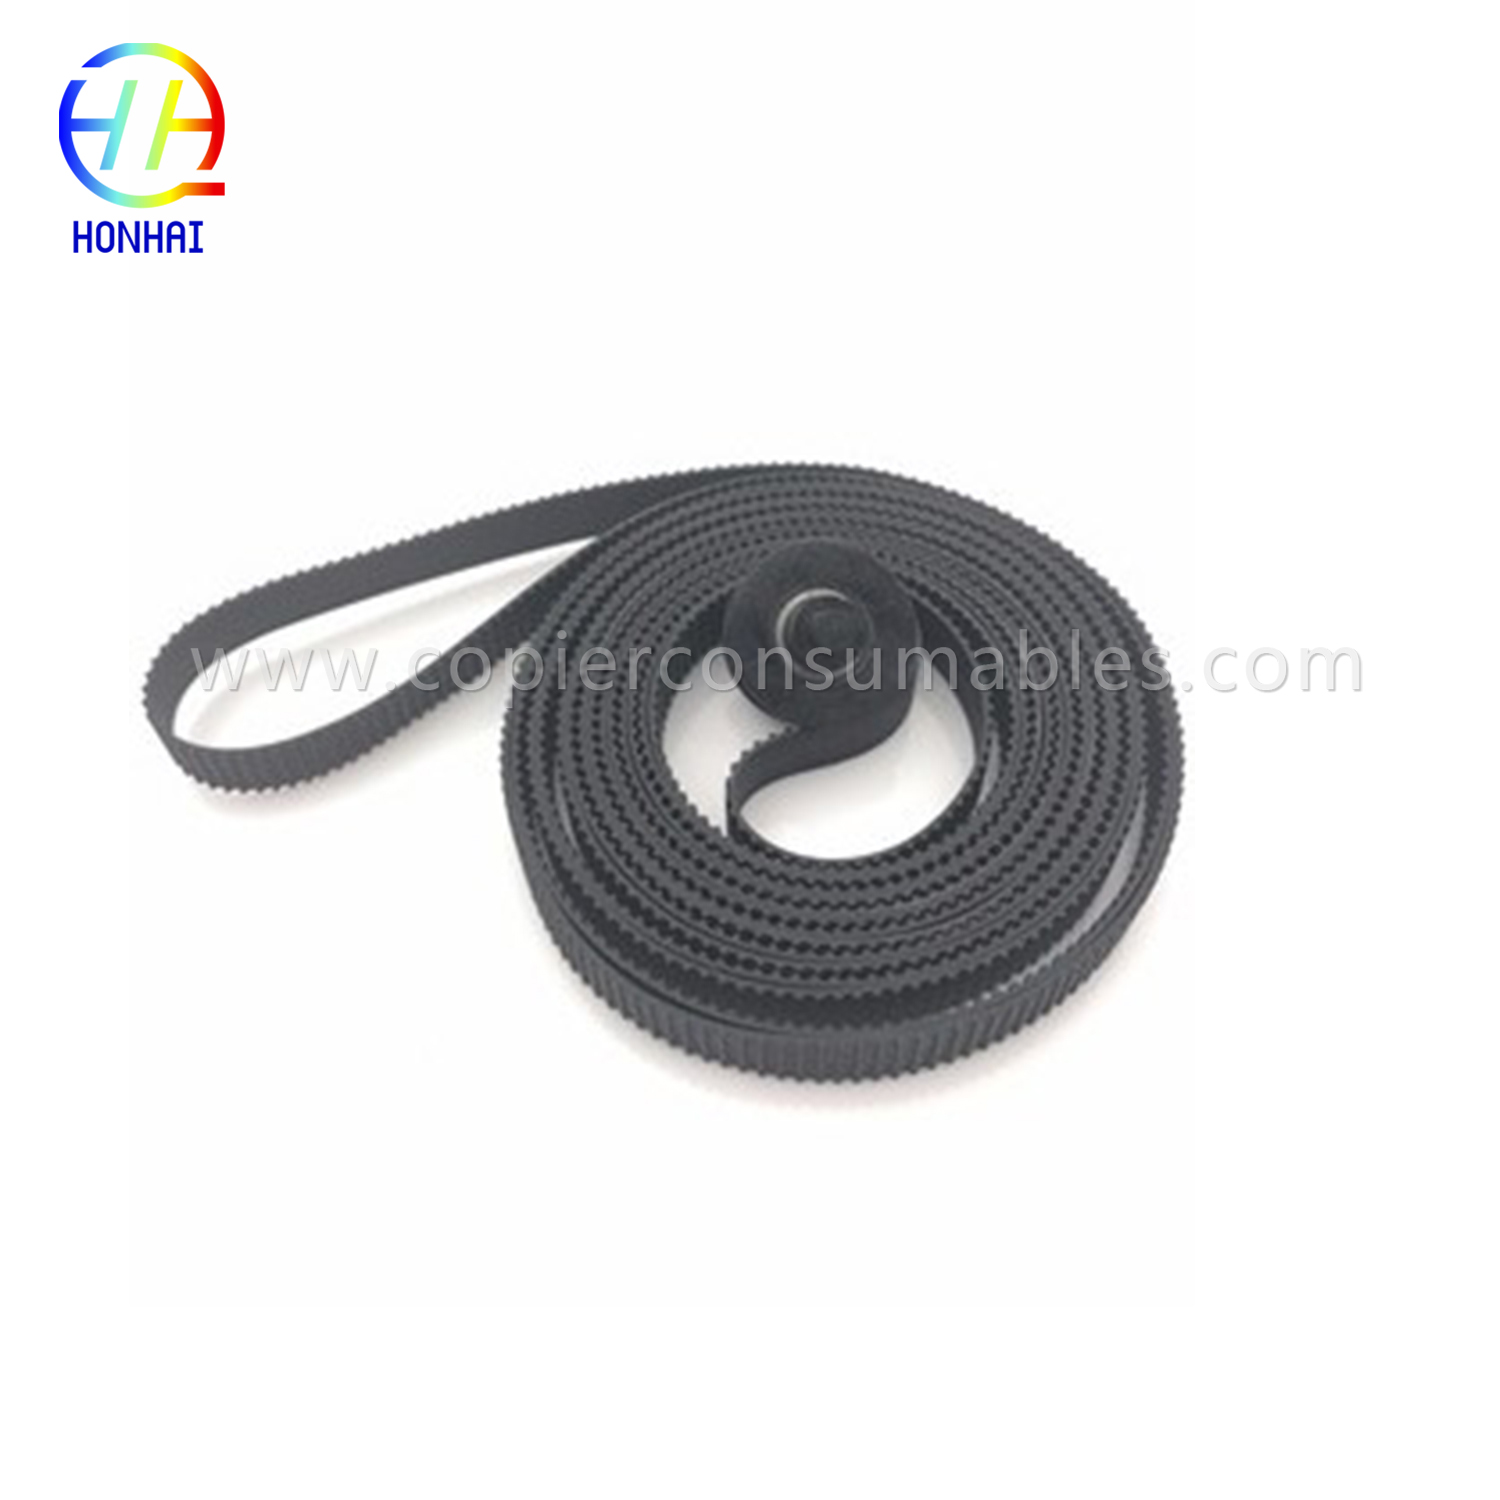 Scan Axis Carriage Belt for HP Designjet T1100 T1120 T1120PS T1200 T610 Z2100 Z2100 Z3100 Z3200 Q6659-60175